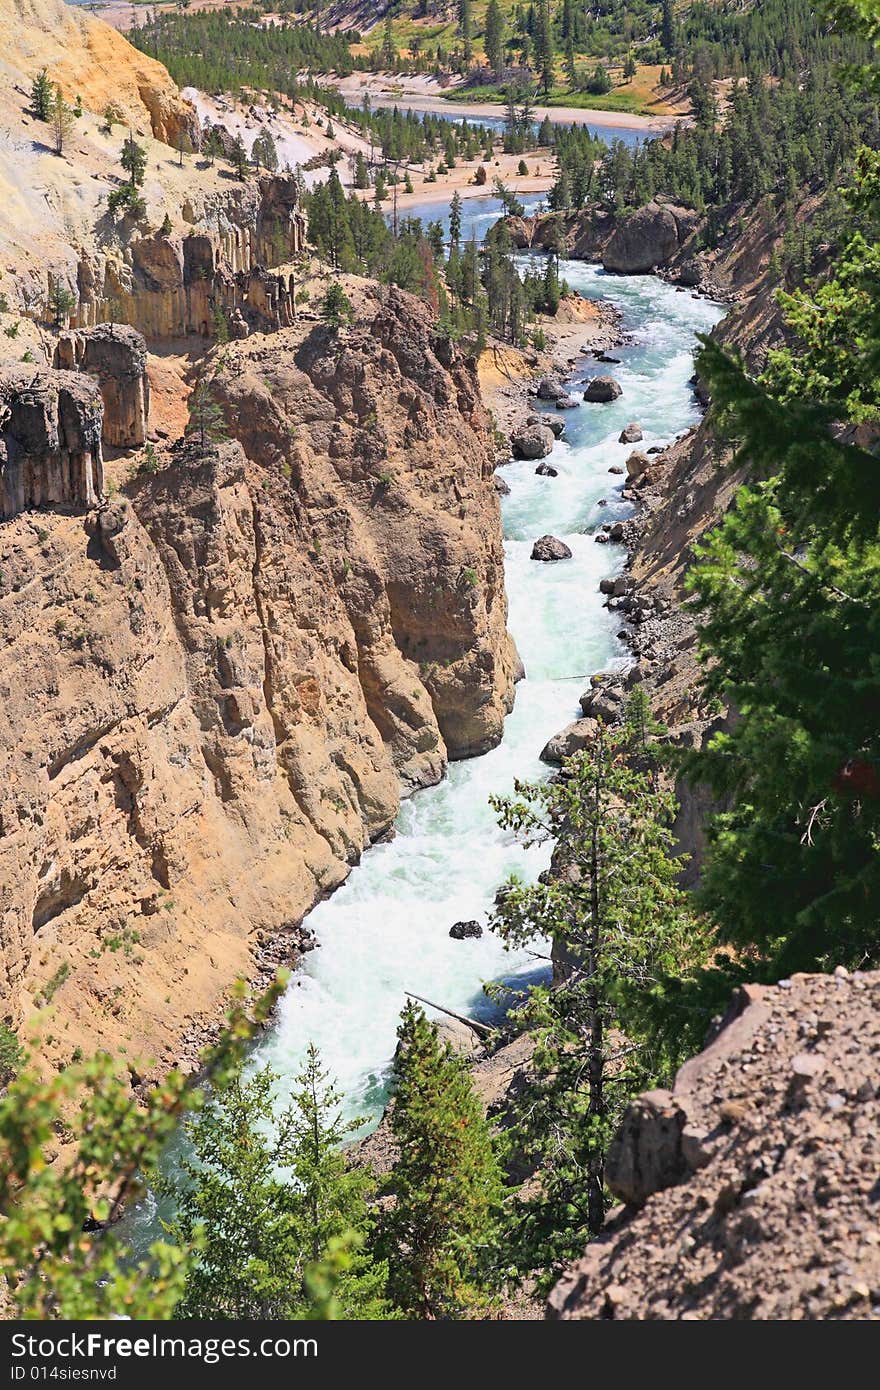 The Yellowstone River in Yellowstone National Park in Wyoming. The Yellowstone River in Yellowstone National Park in Wyoming